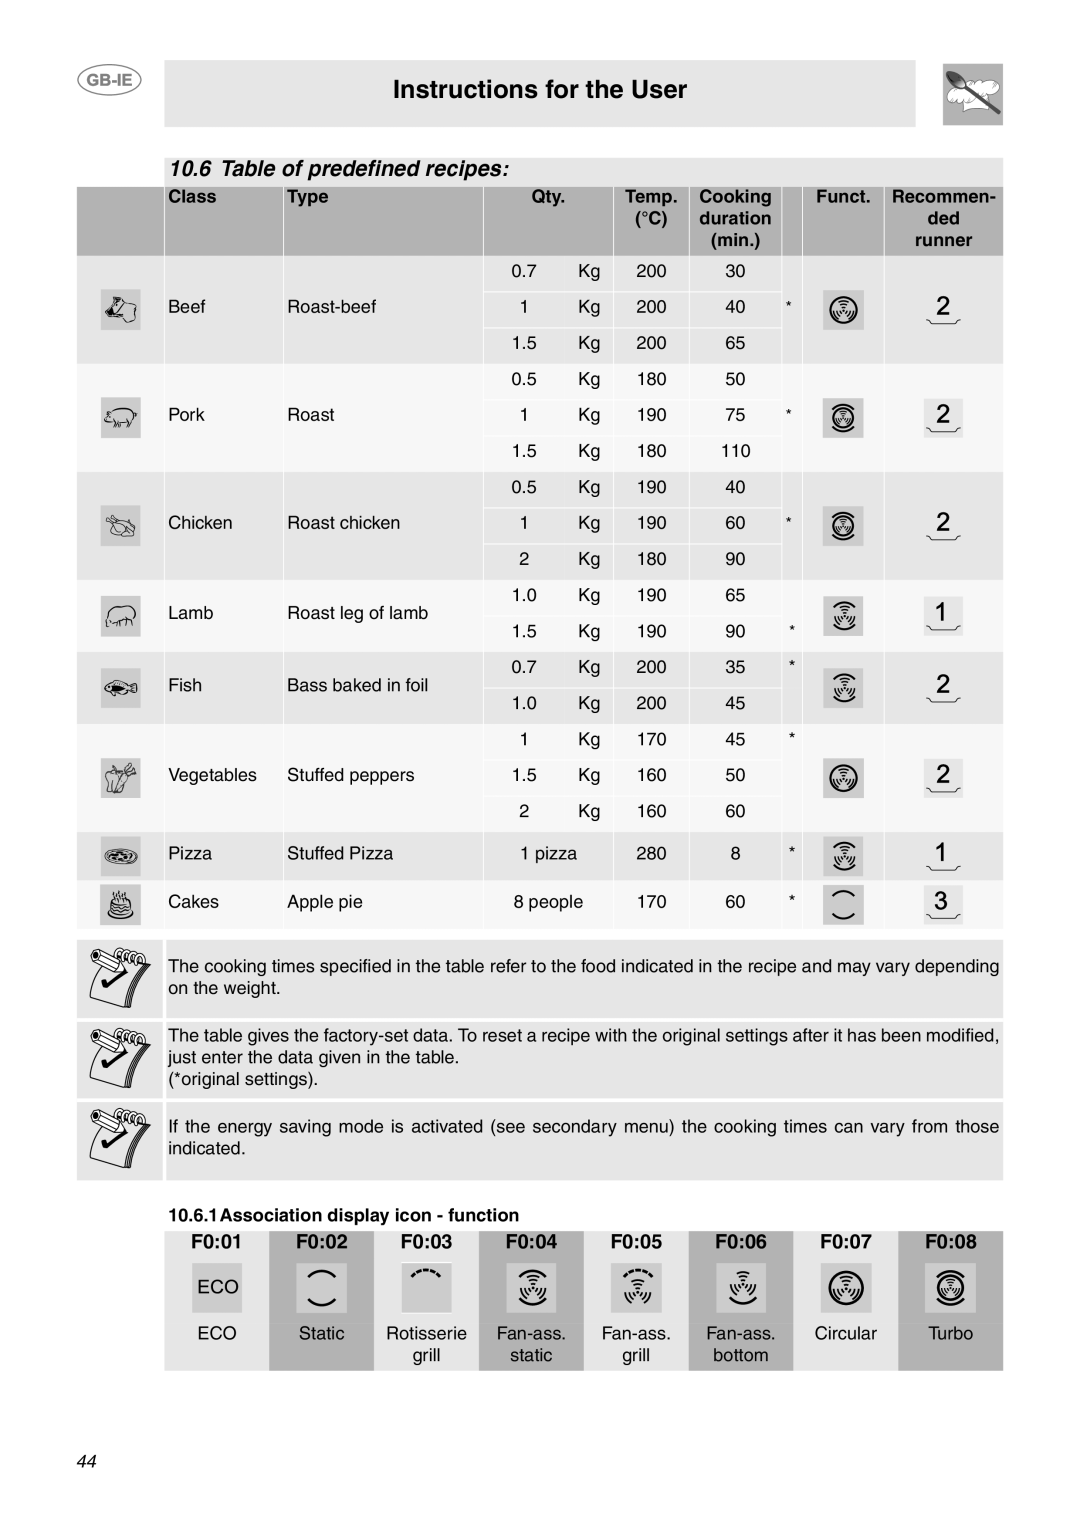 Smeg CE92IMX Table of predefined recipes, Instructions for the User, F001, F002, F003, F004, F005, F006, F007, F008, Class 